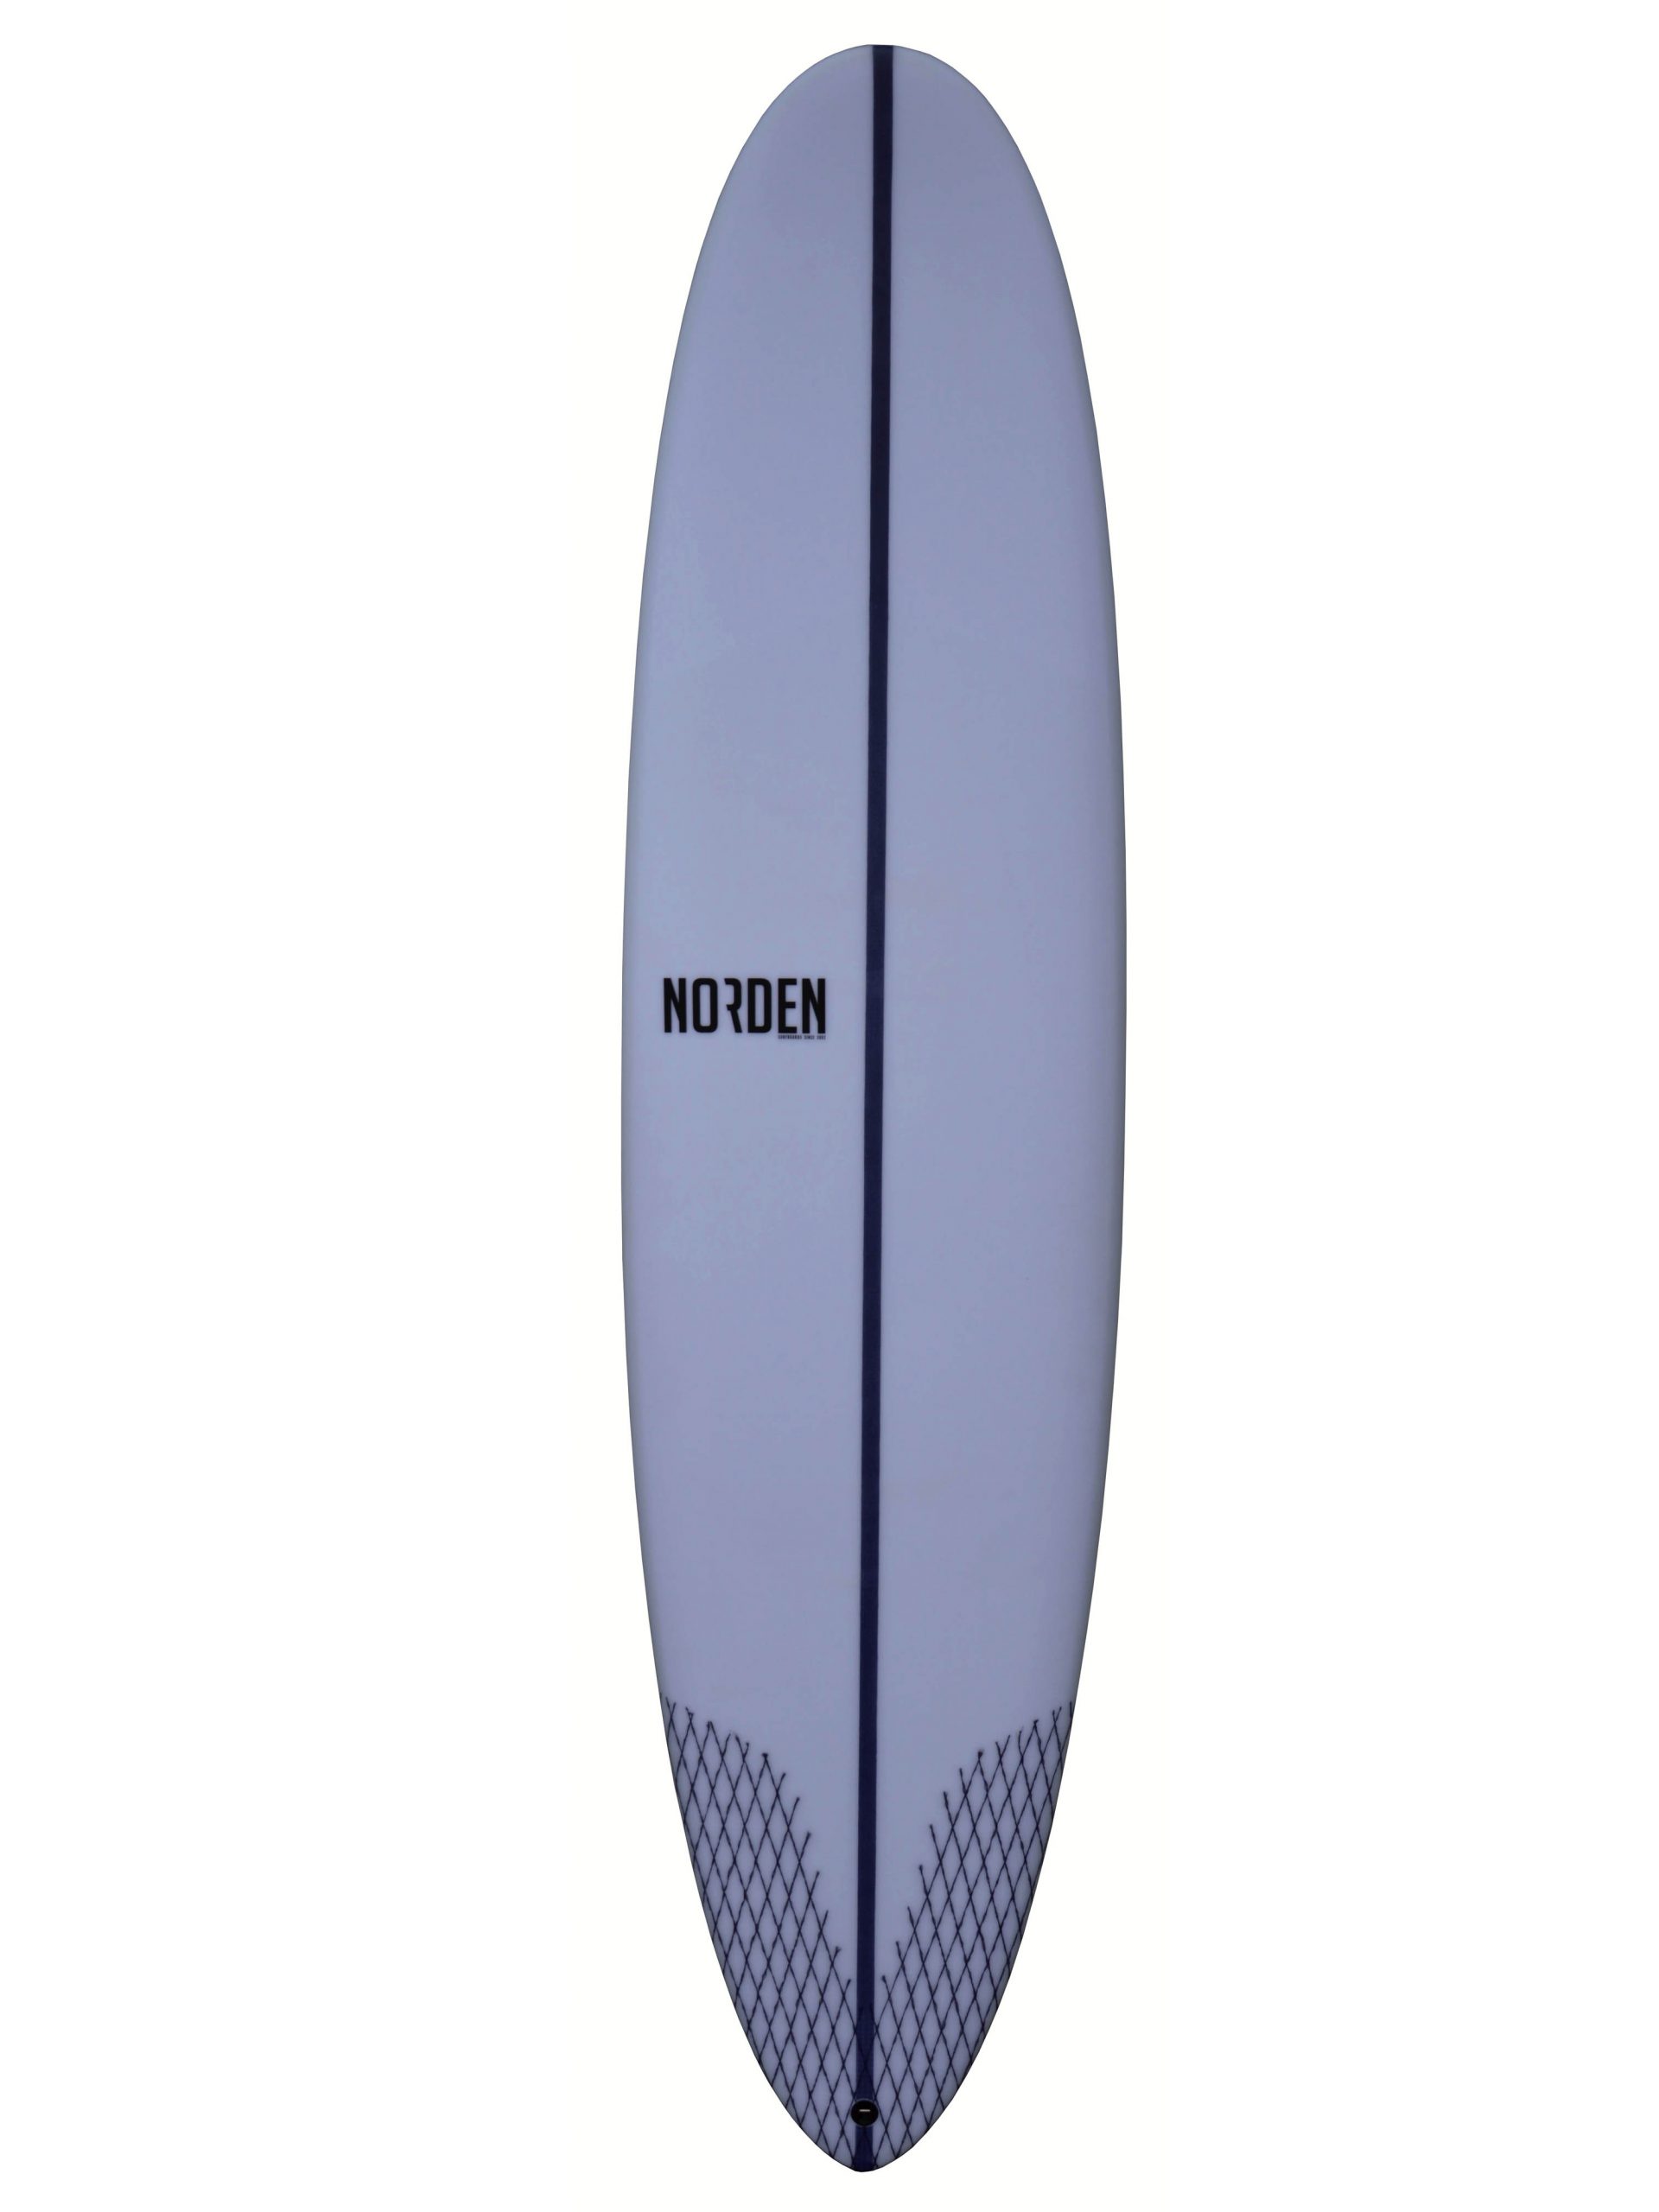 Norden SS21 Surboards